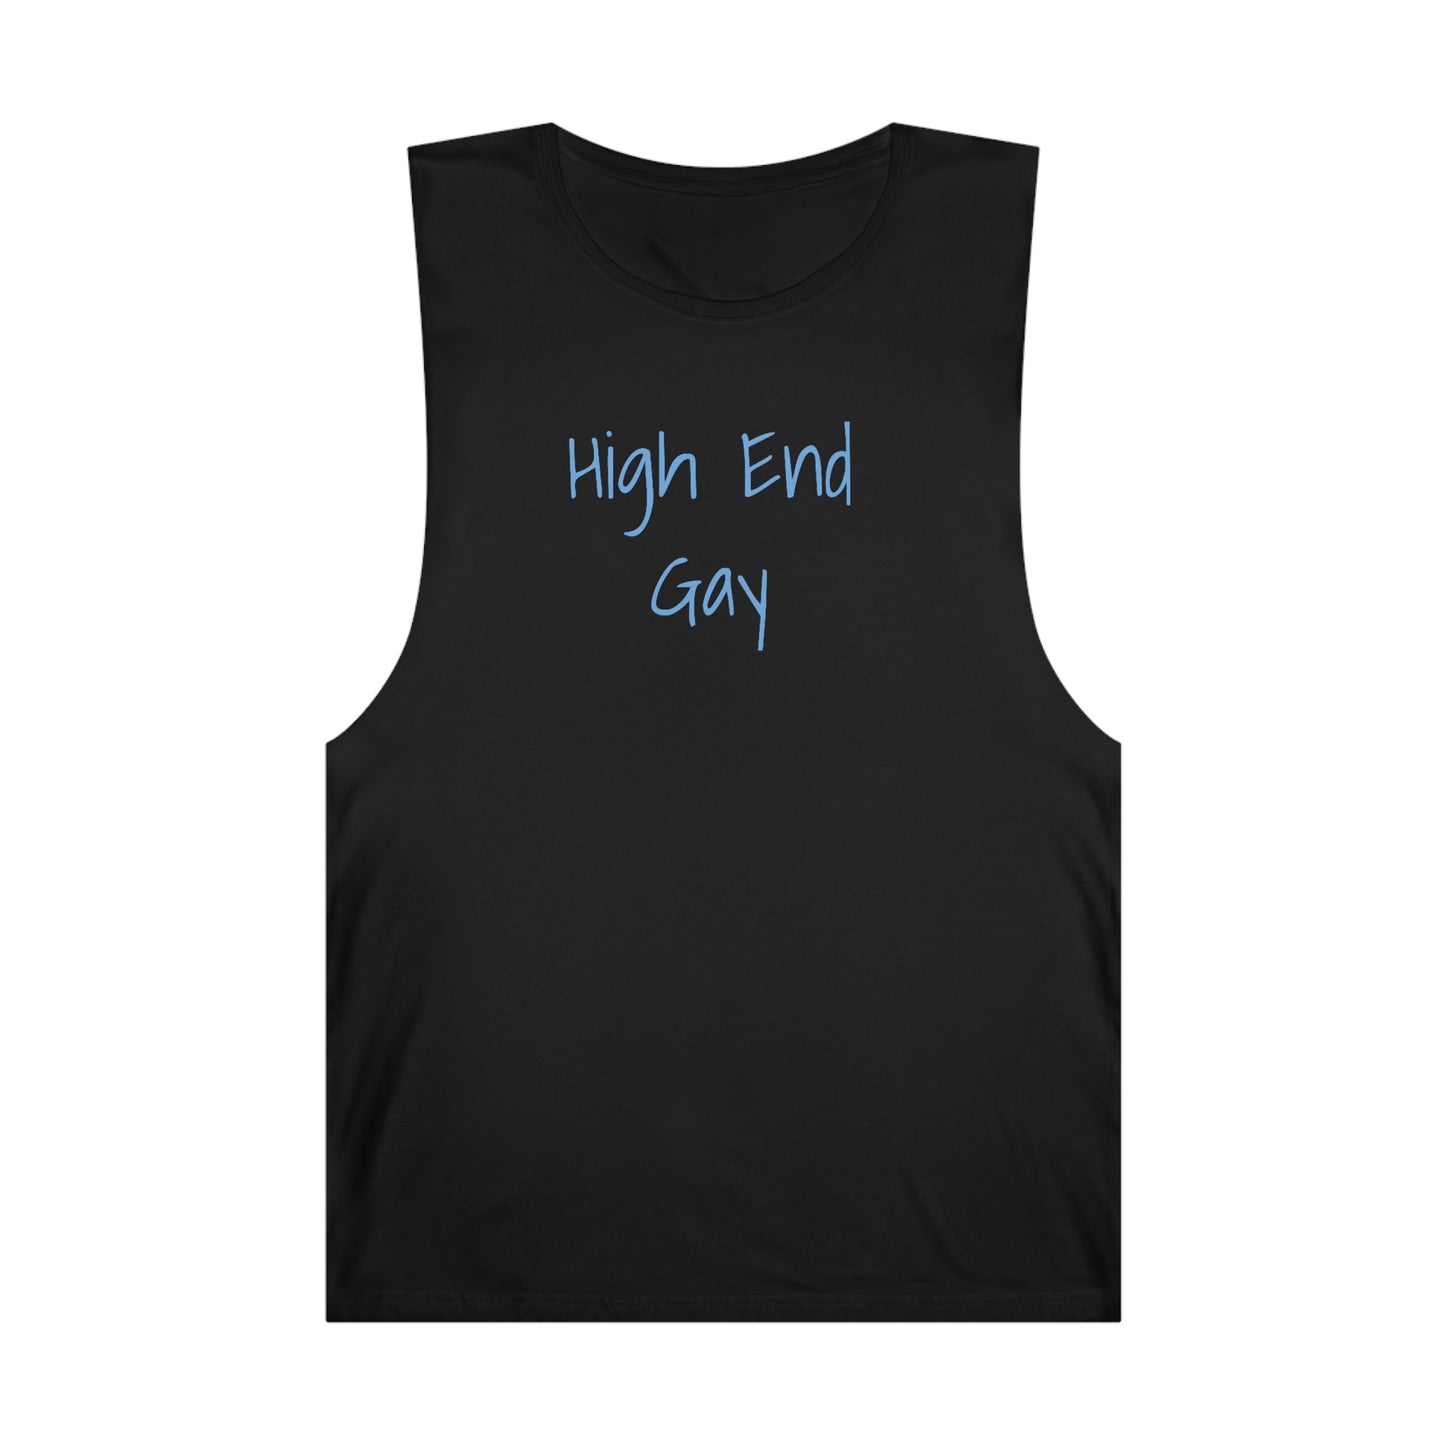 'High End Gay' - Coolidge Collection Unisex Tank